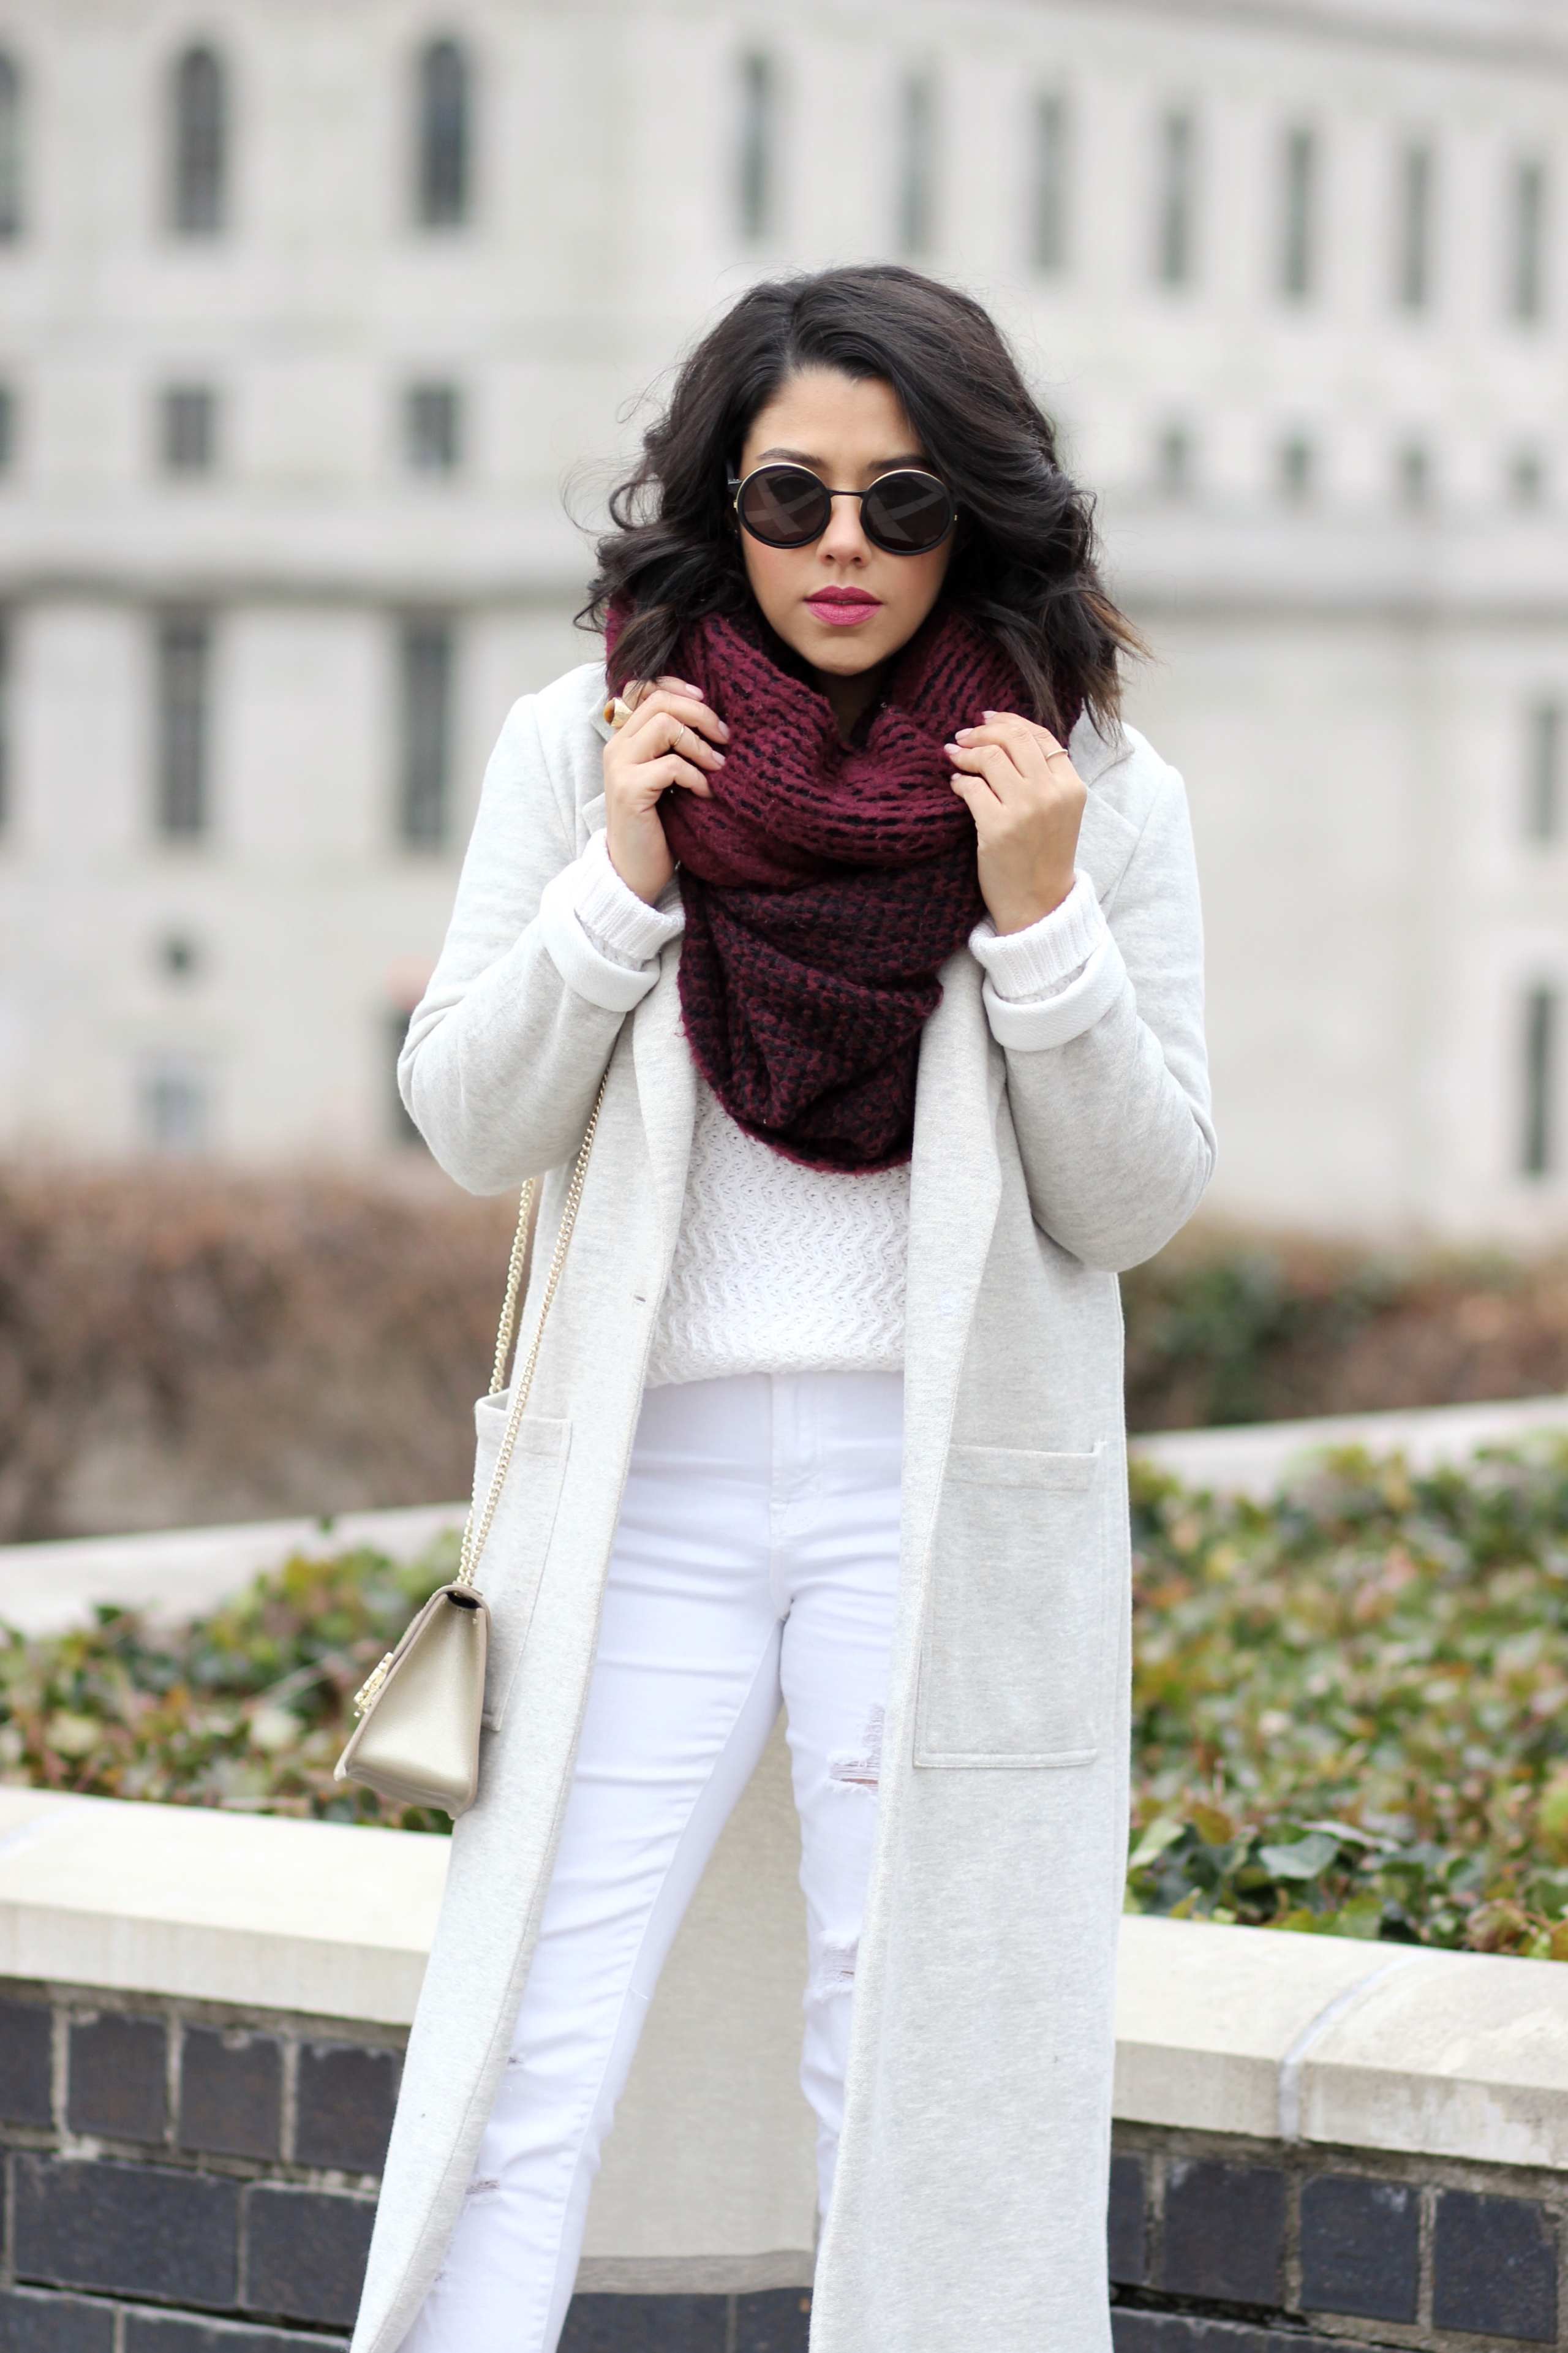 Winter Whites & Burgundy Accents - Naty Michele